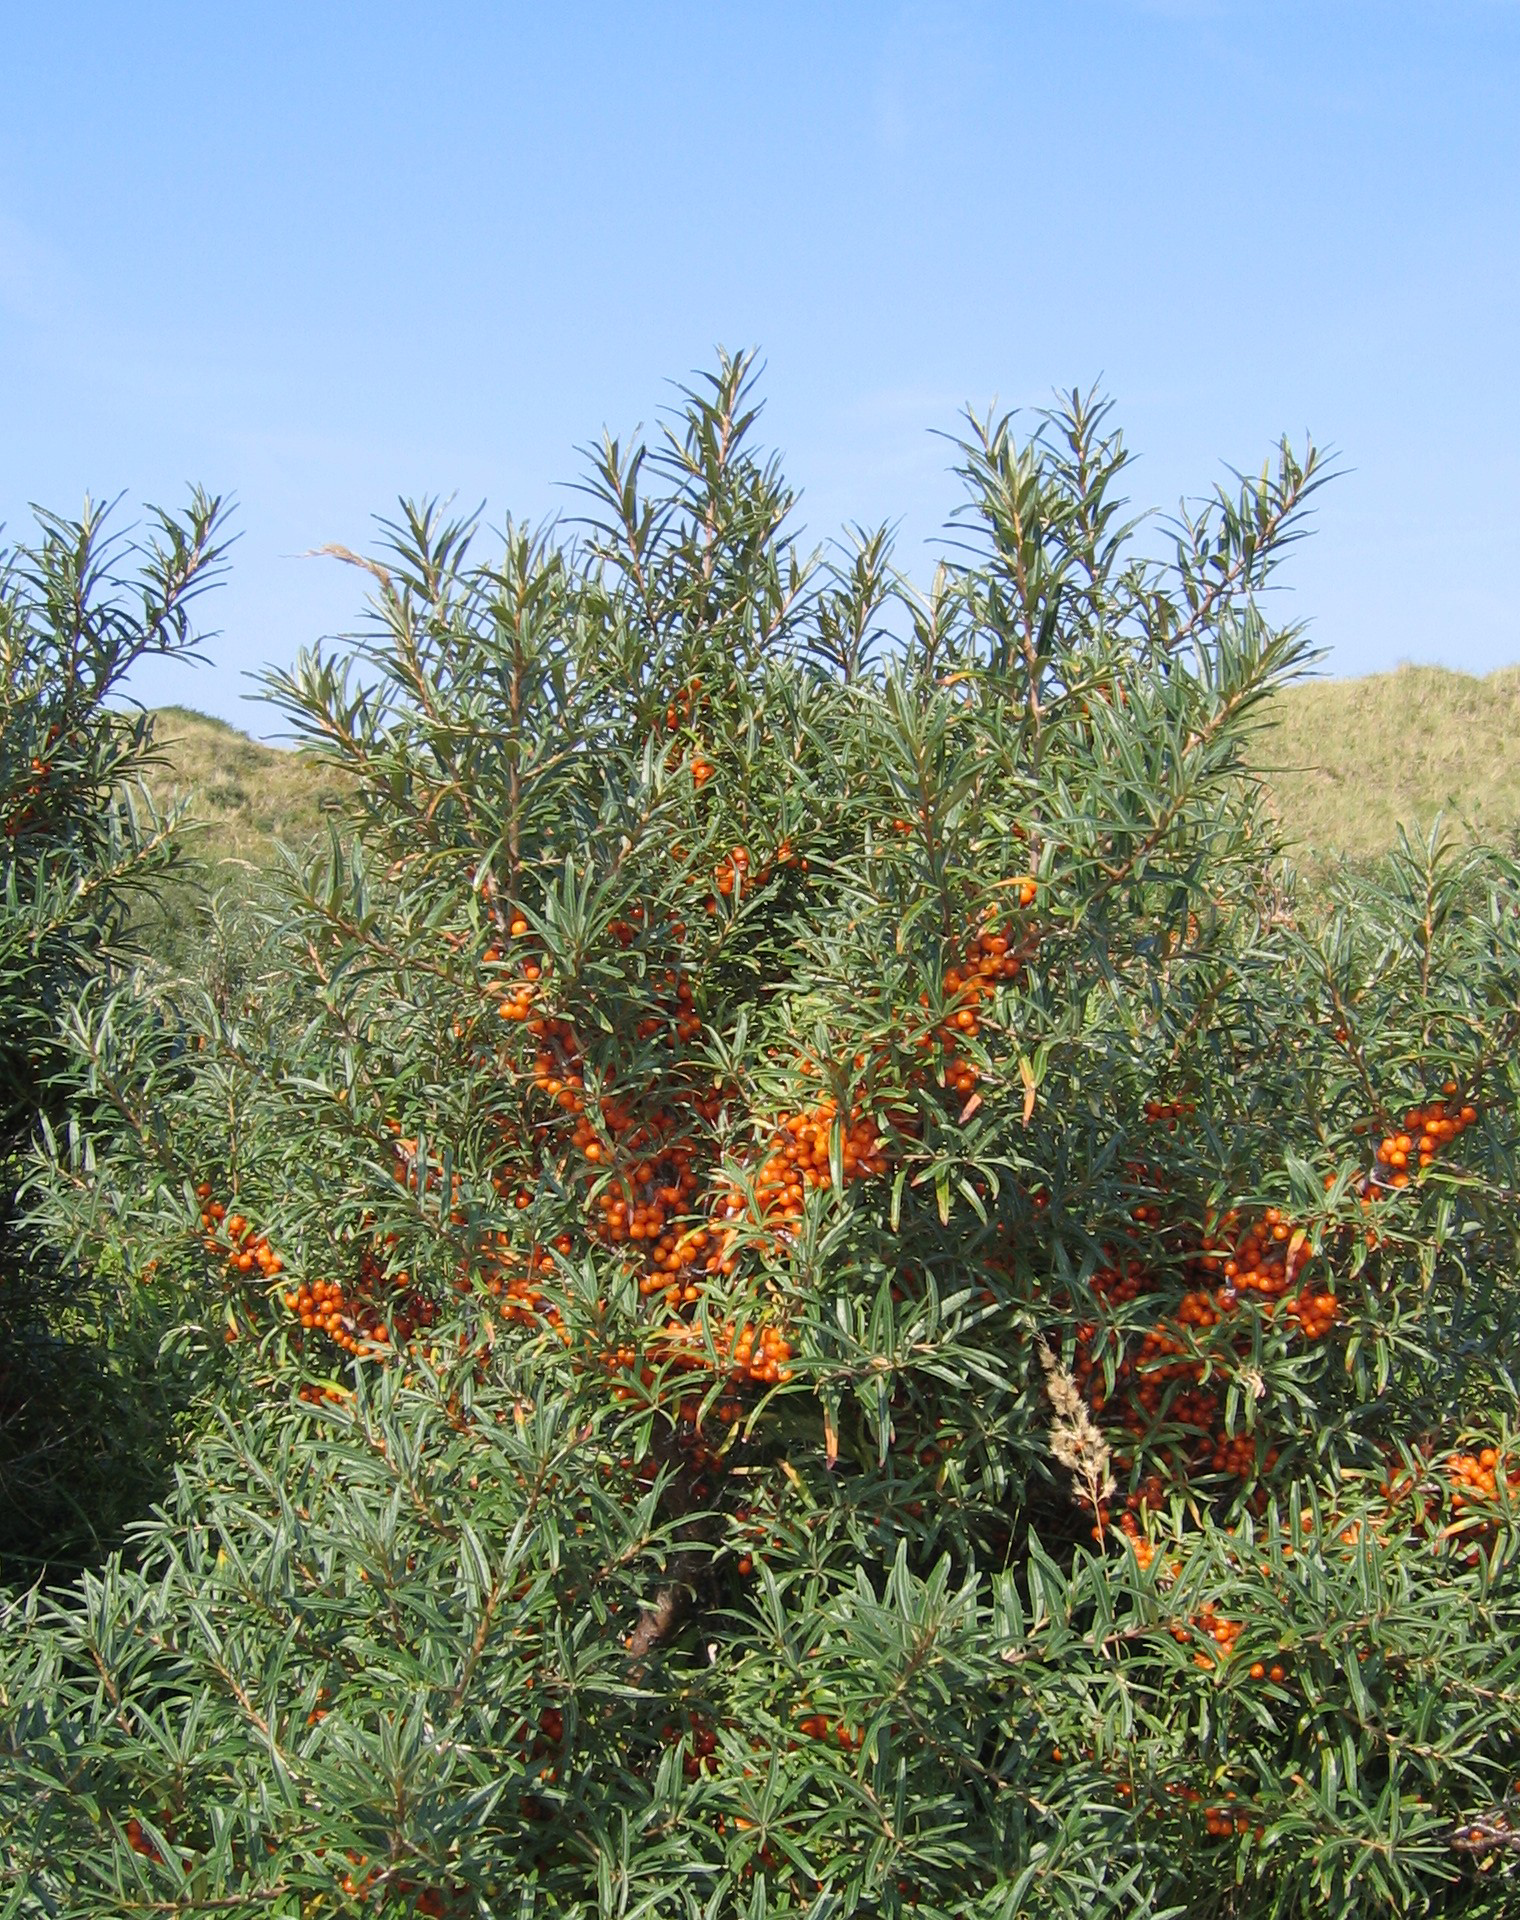 A close-up of a Sea Buckthorn in Ladakh
Description automatically generated